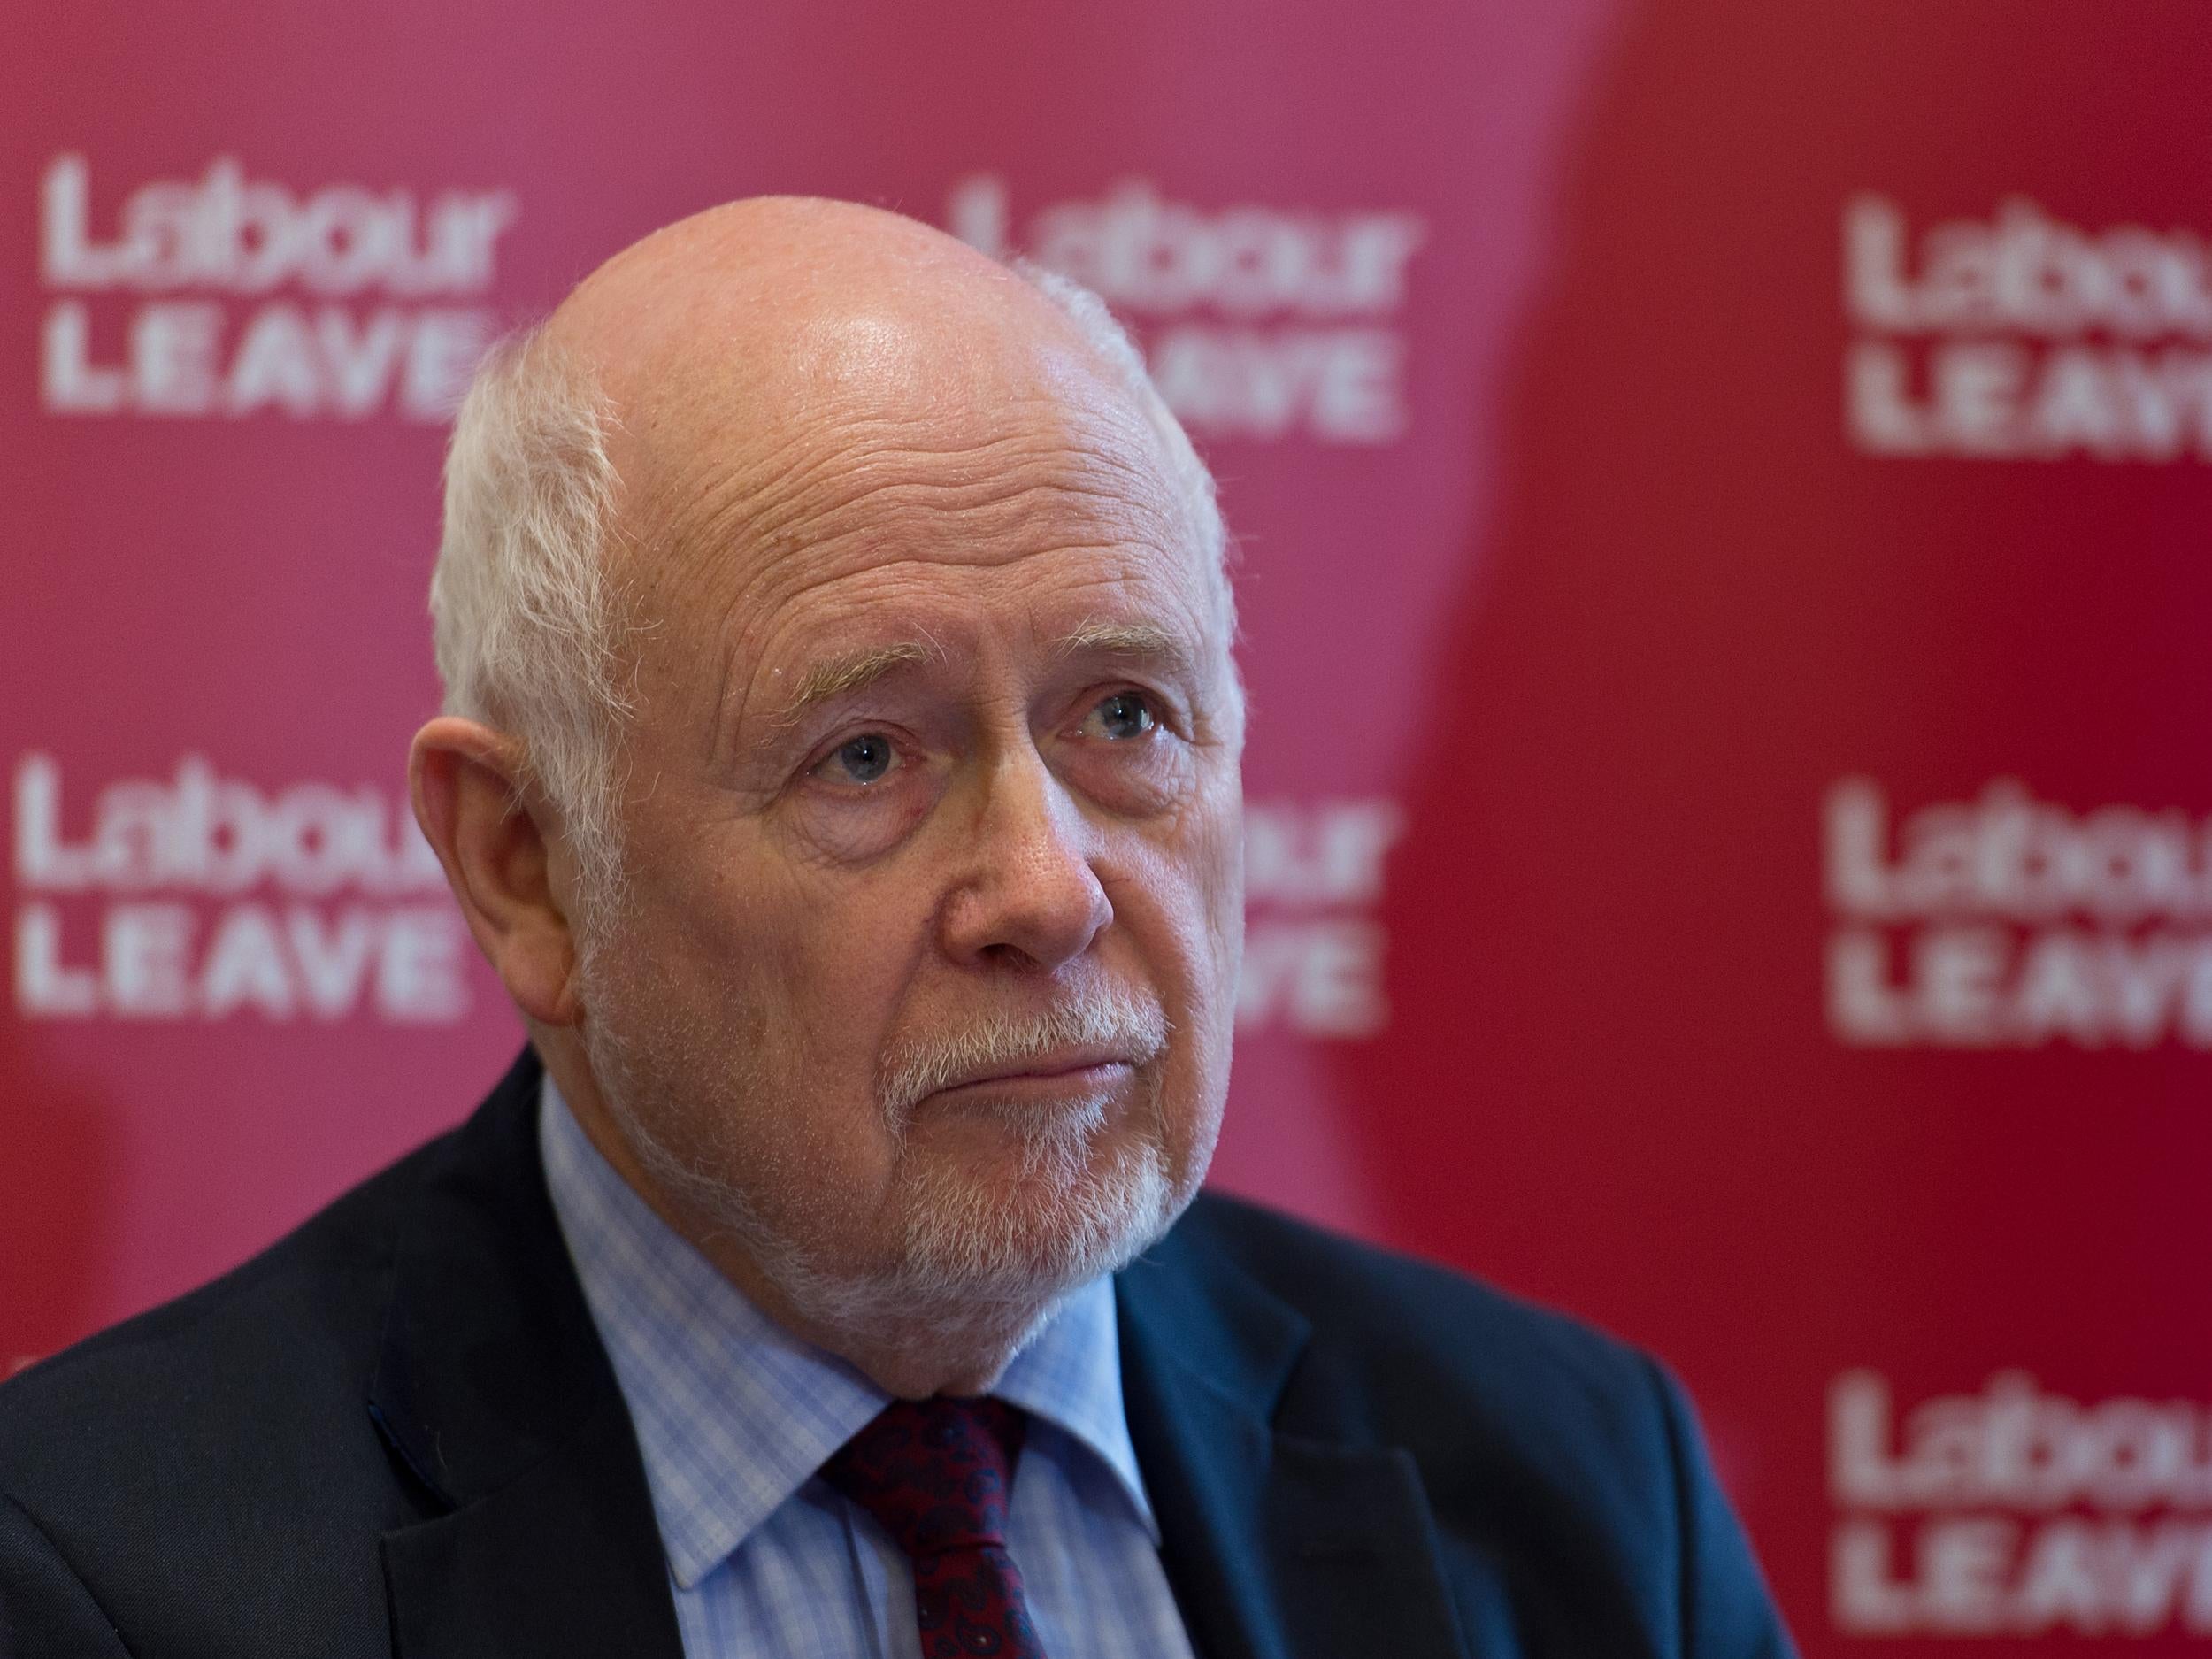 Kelvin Hopkins has been suspended from Labour while the party probes allegations of misconduct